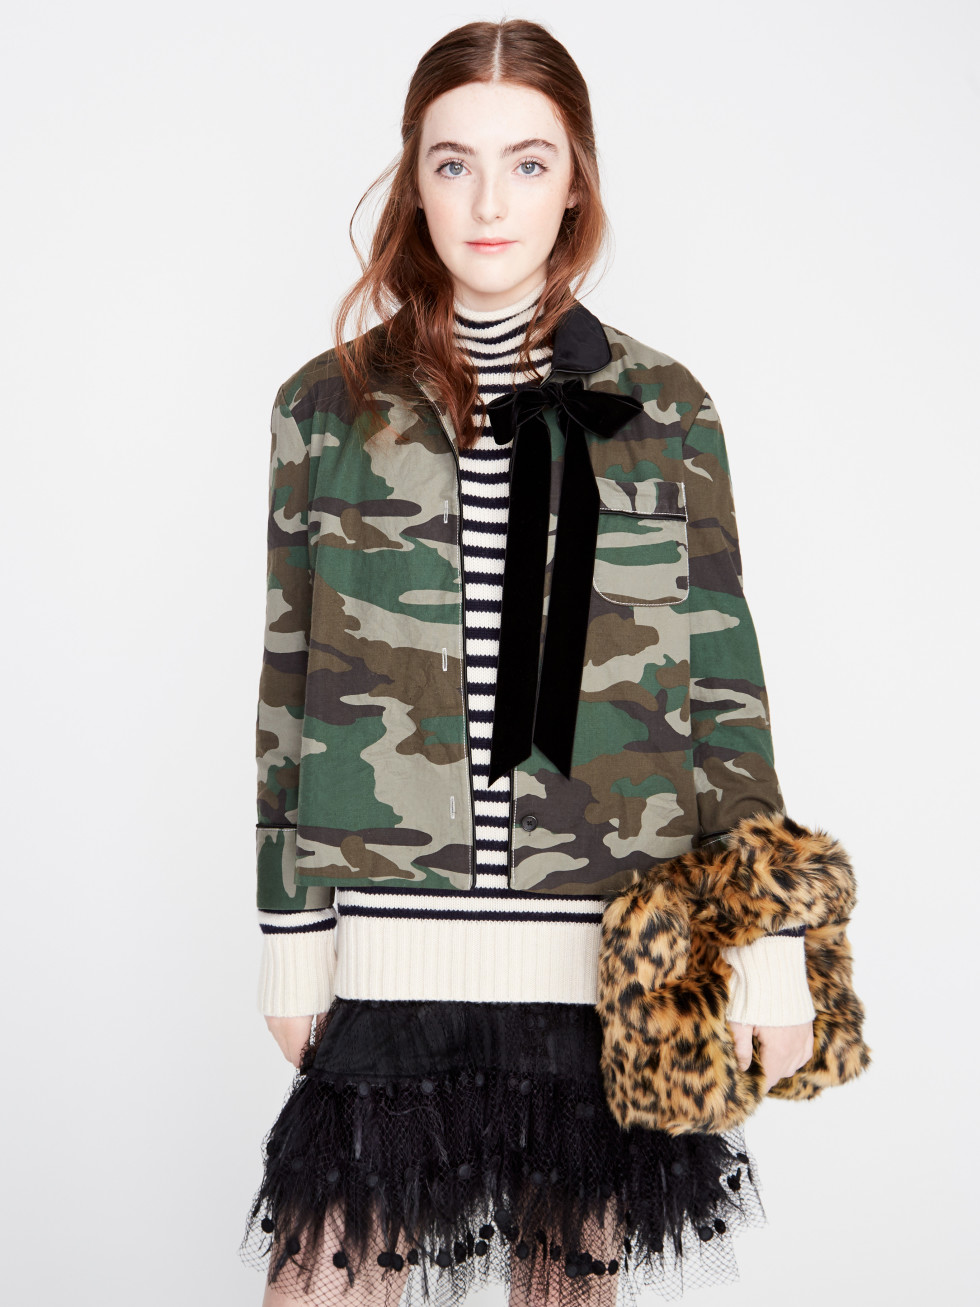 Julianne Moore daughter Liv Freundlich modeling J.Crew fall collection